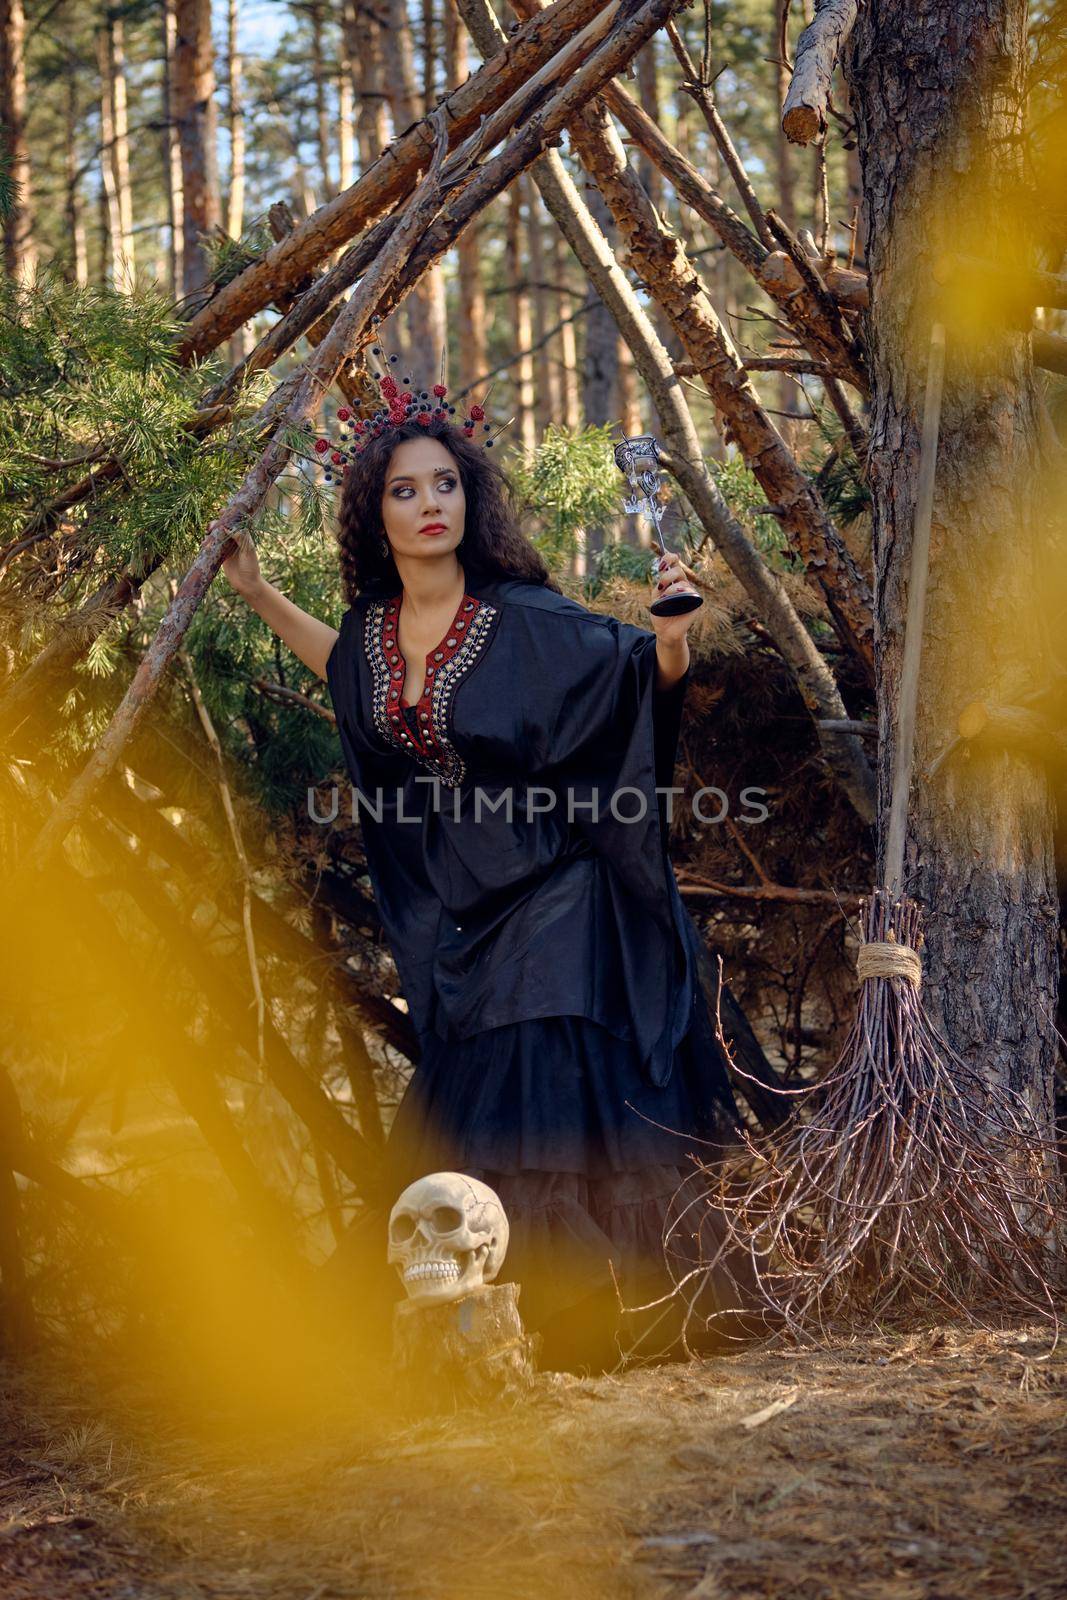 Beautiful, wicked, long-haired witch in a black, long embroidered dress. There is large red crown in her brown, curly hair. She is posing with her broom and a skull while standing near a hut in a pine forest. Spells, magic and witchcraft. Full length portrait.